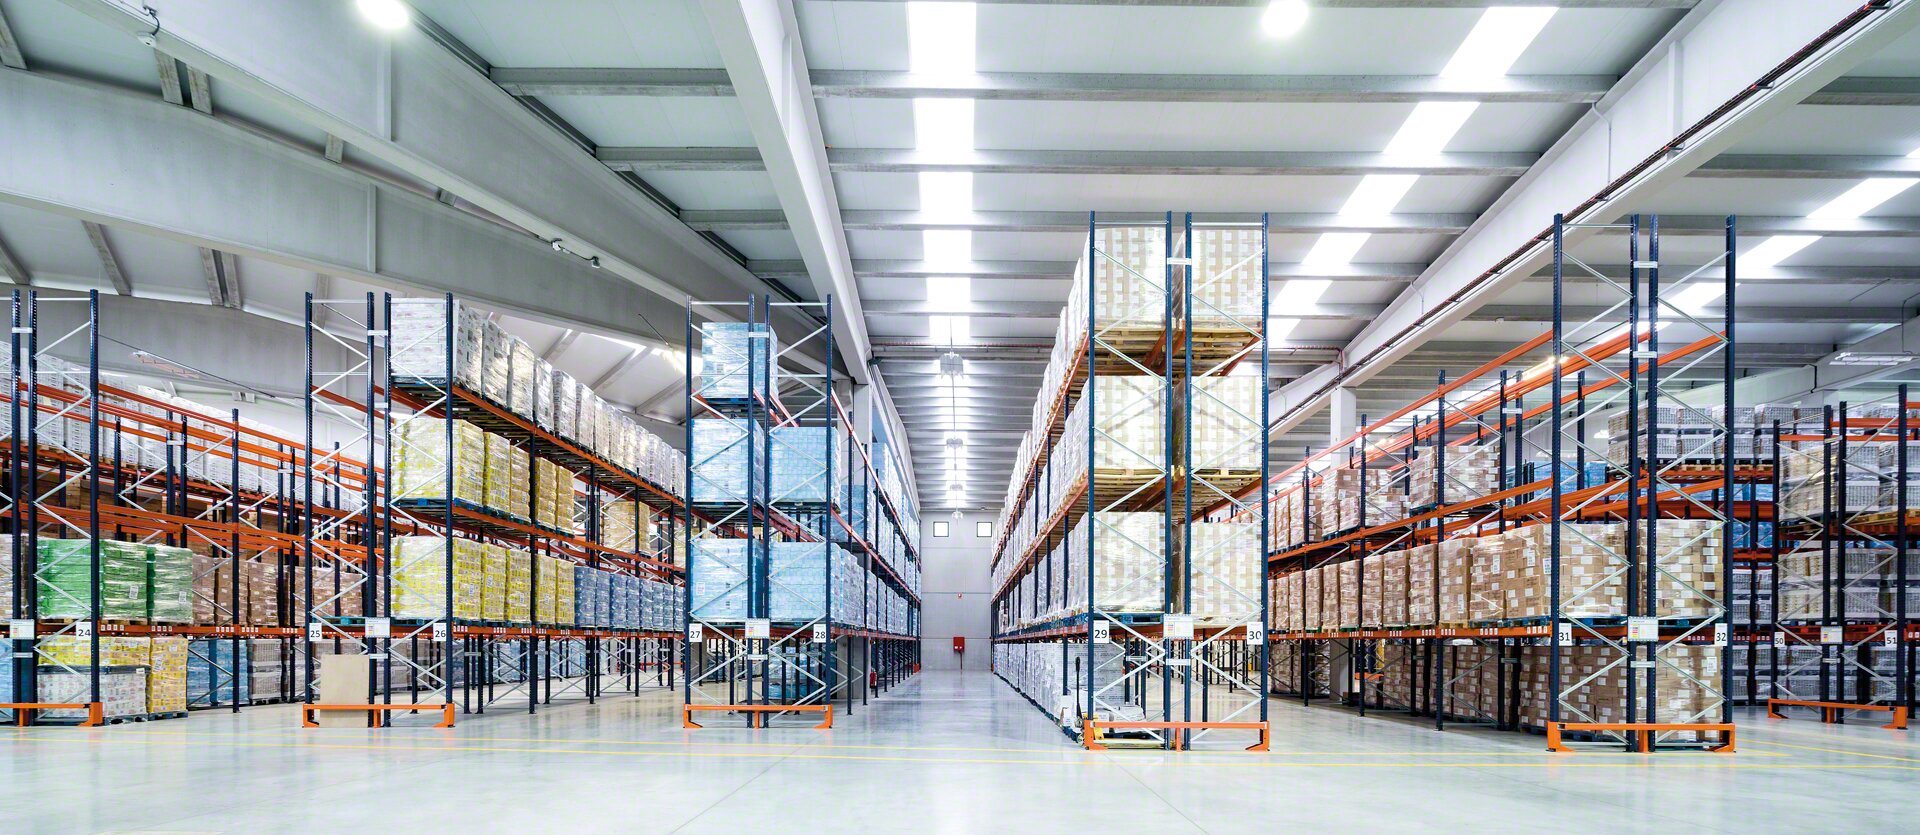 Short warehouse with racks for palletised loads